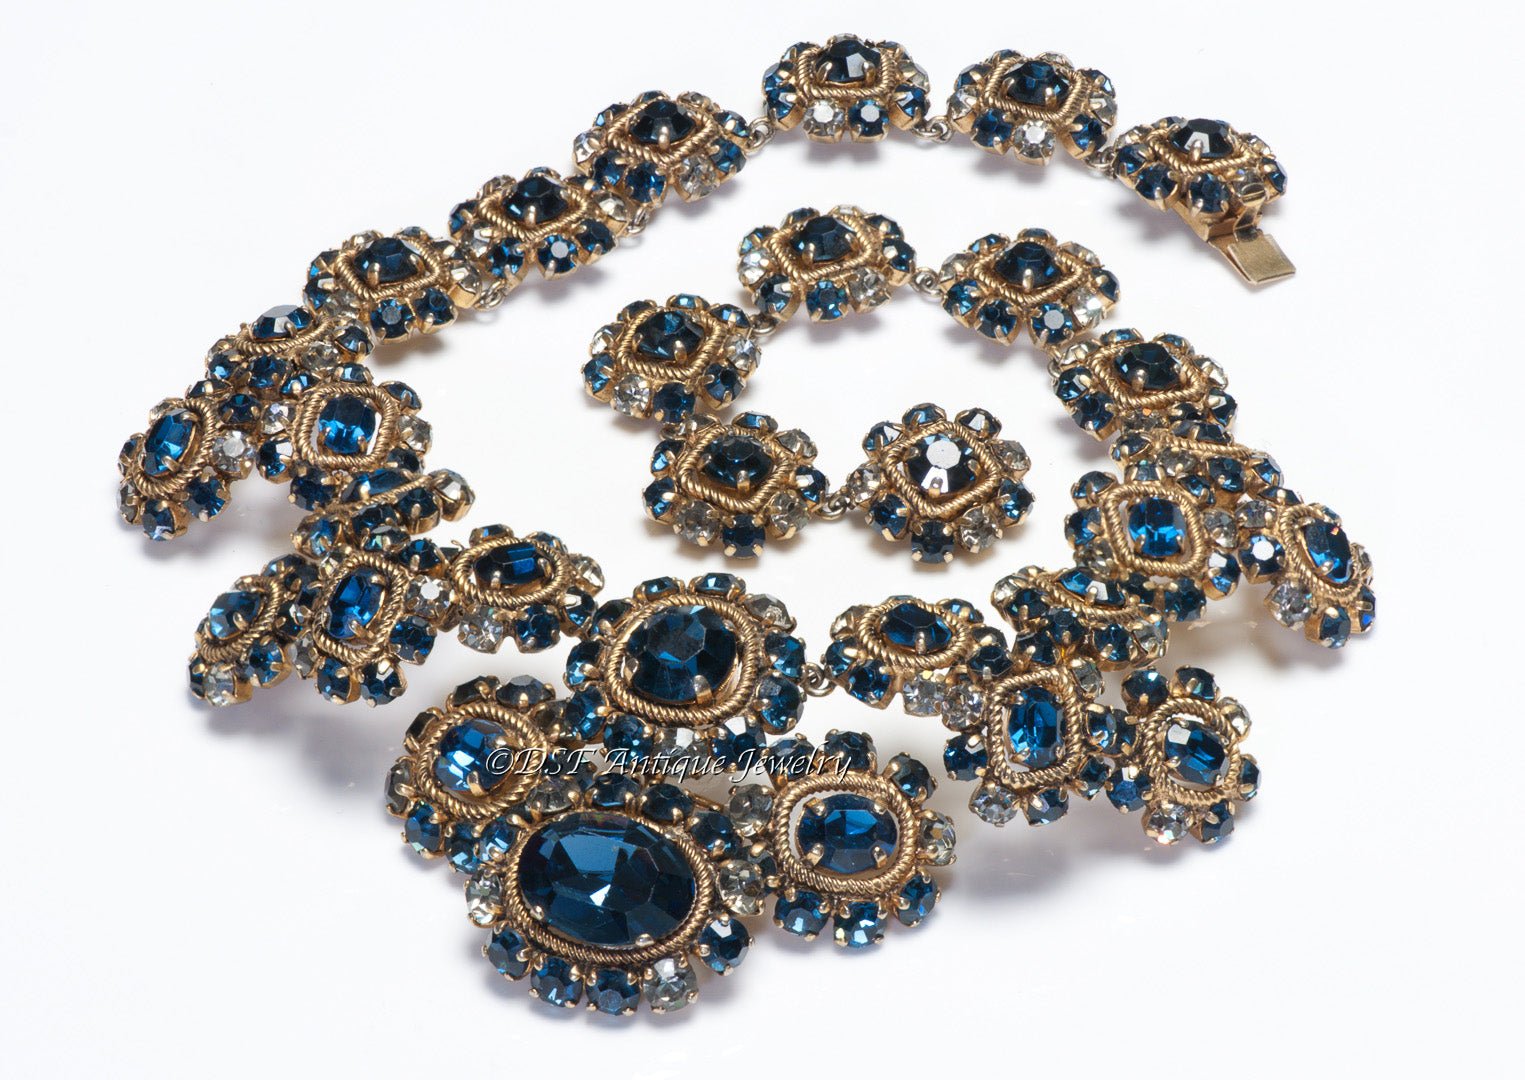 Christian Dior Paris Couture 1964 Henkel & Grosse Blue Crystal Collar Necklace - DSF Antique Jewelry